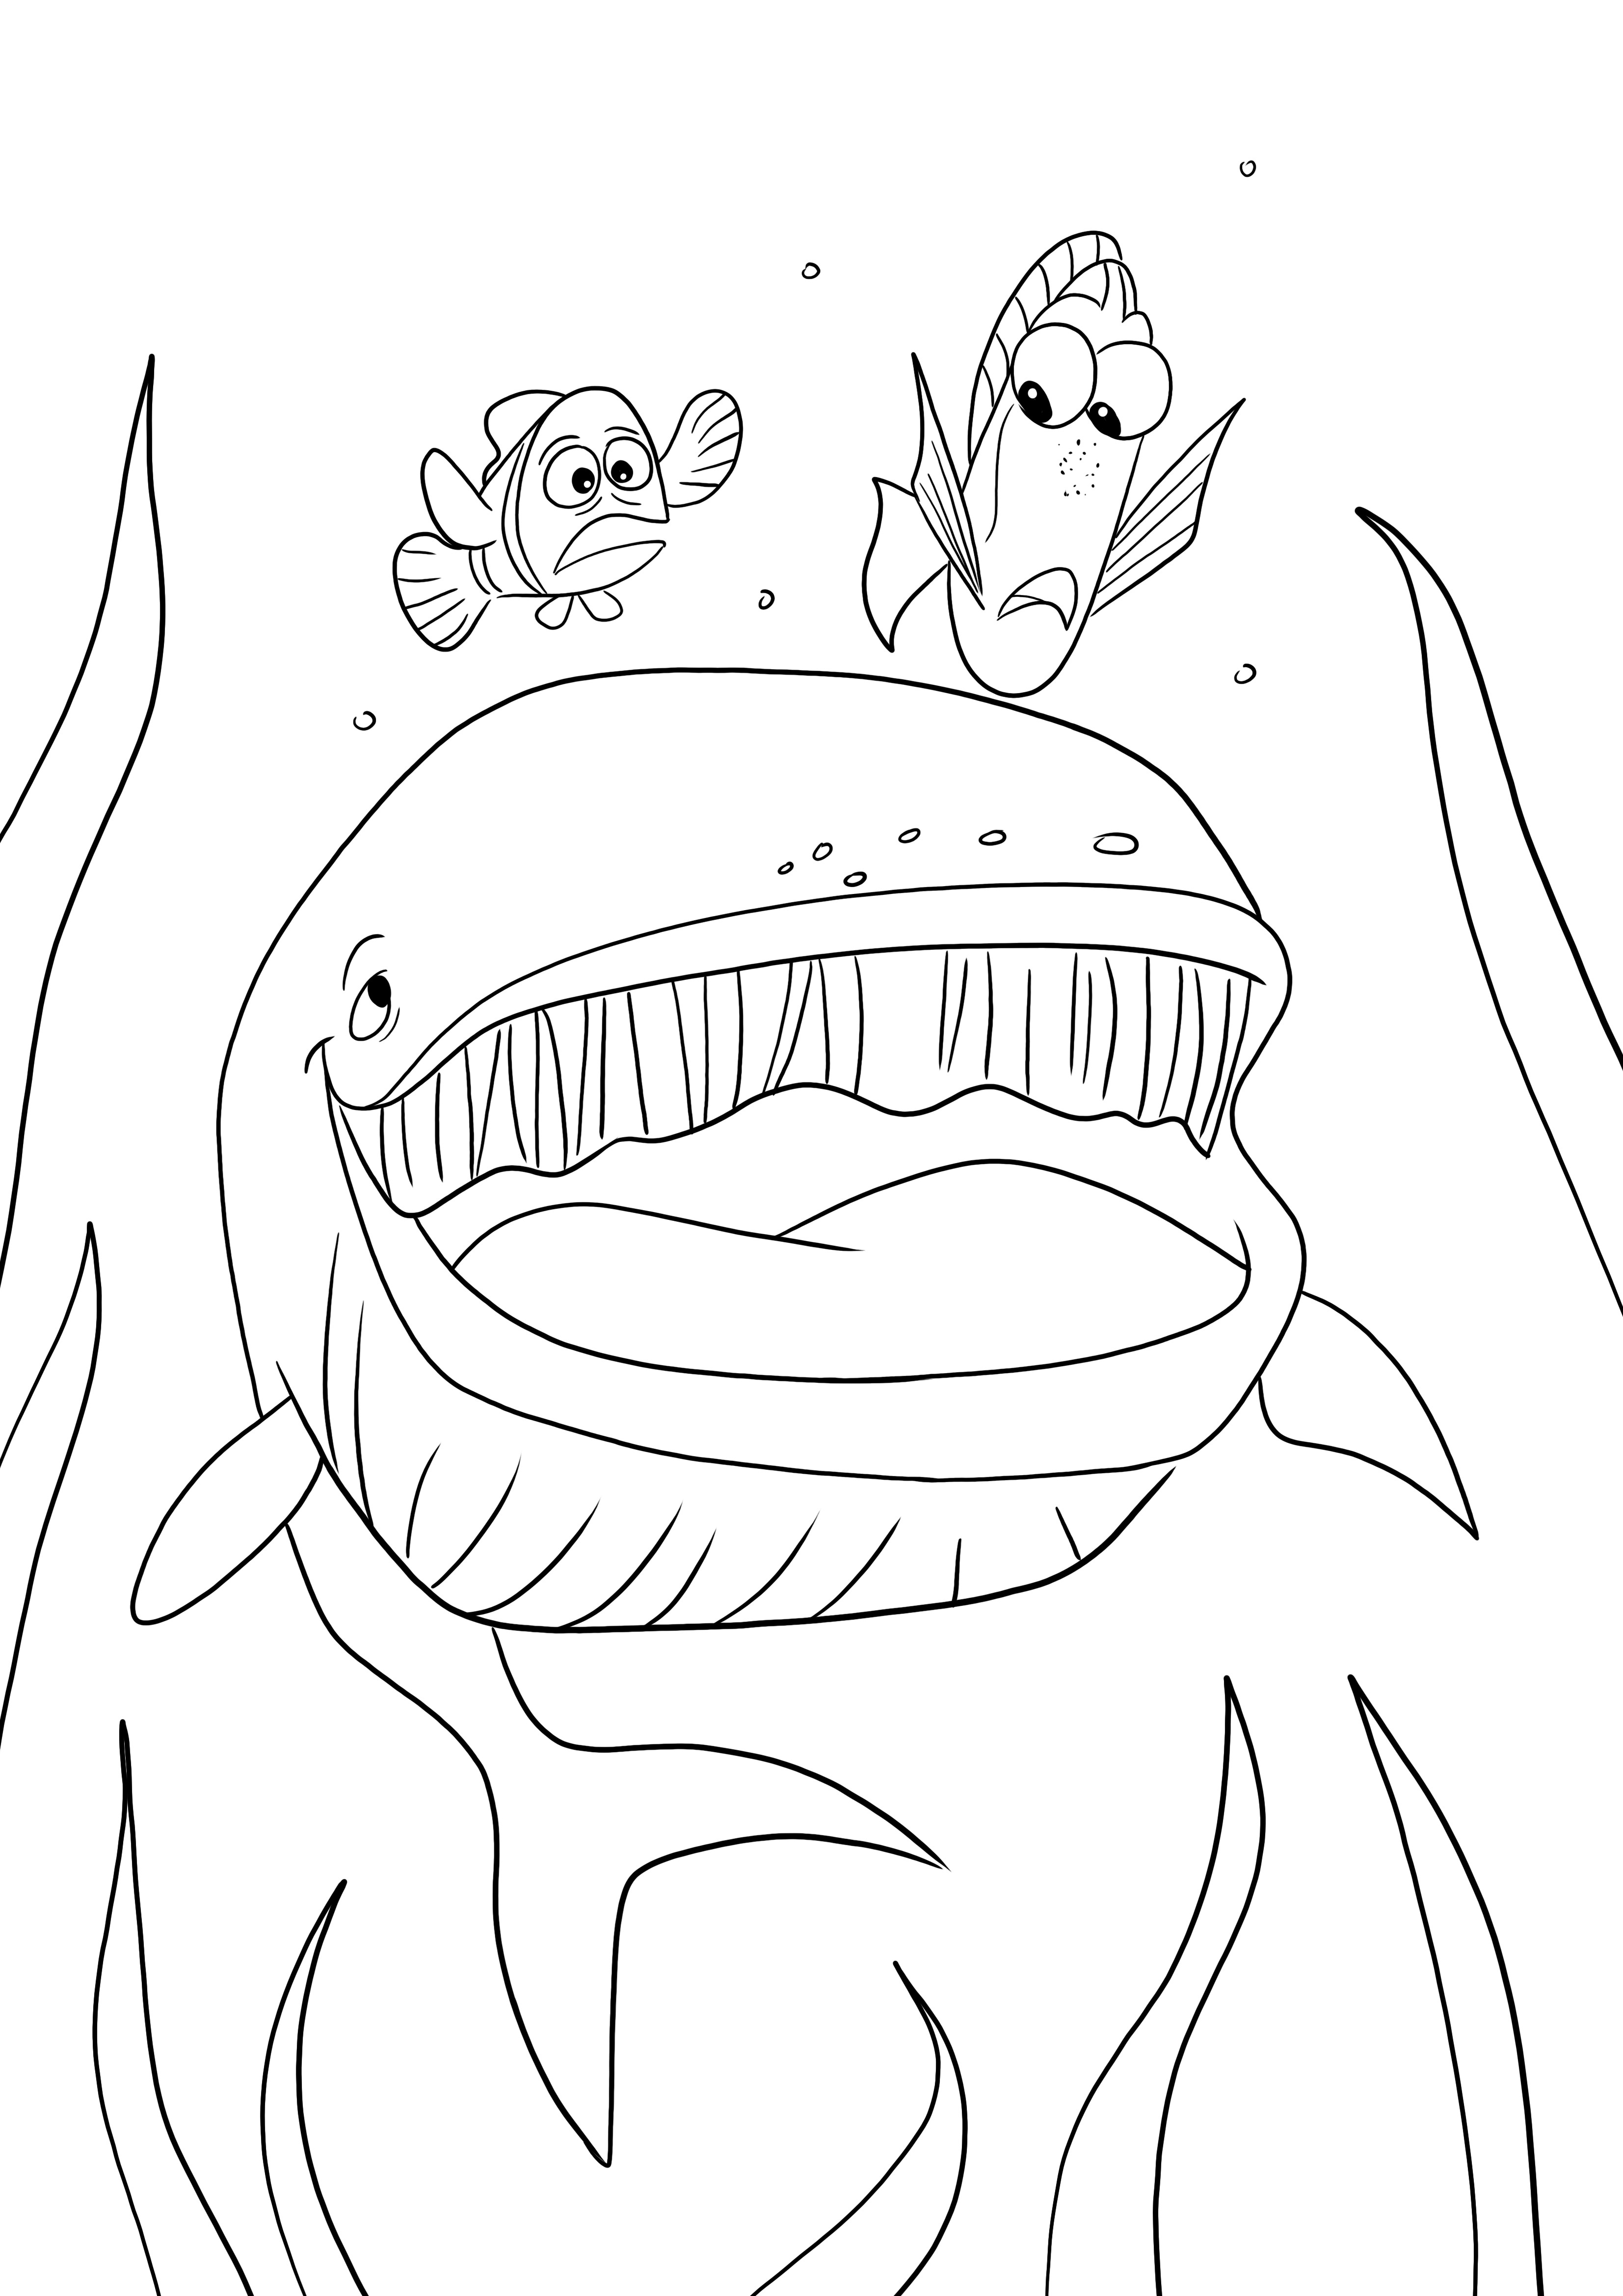 Dory -Nemo and the whale-free to download or print and color for kids